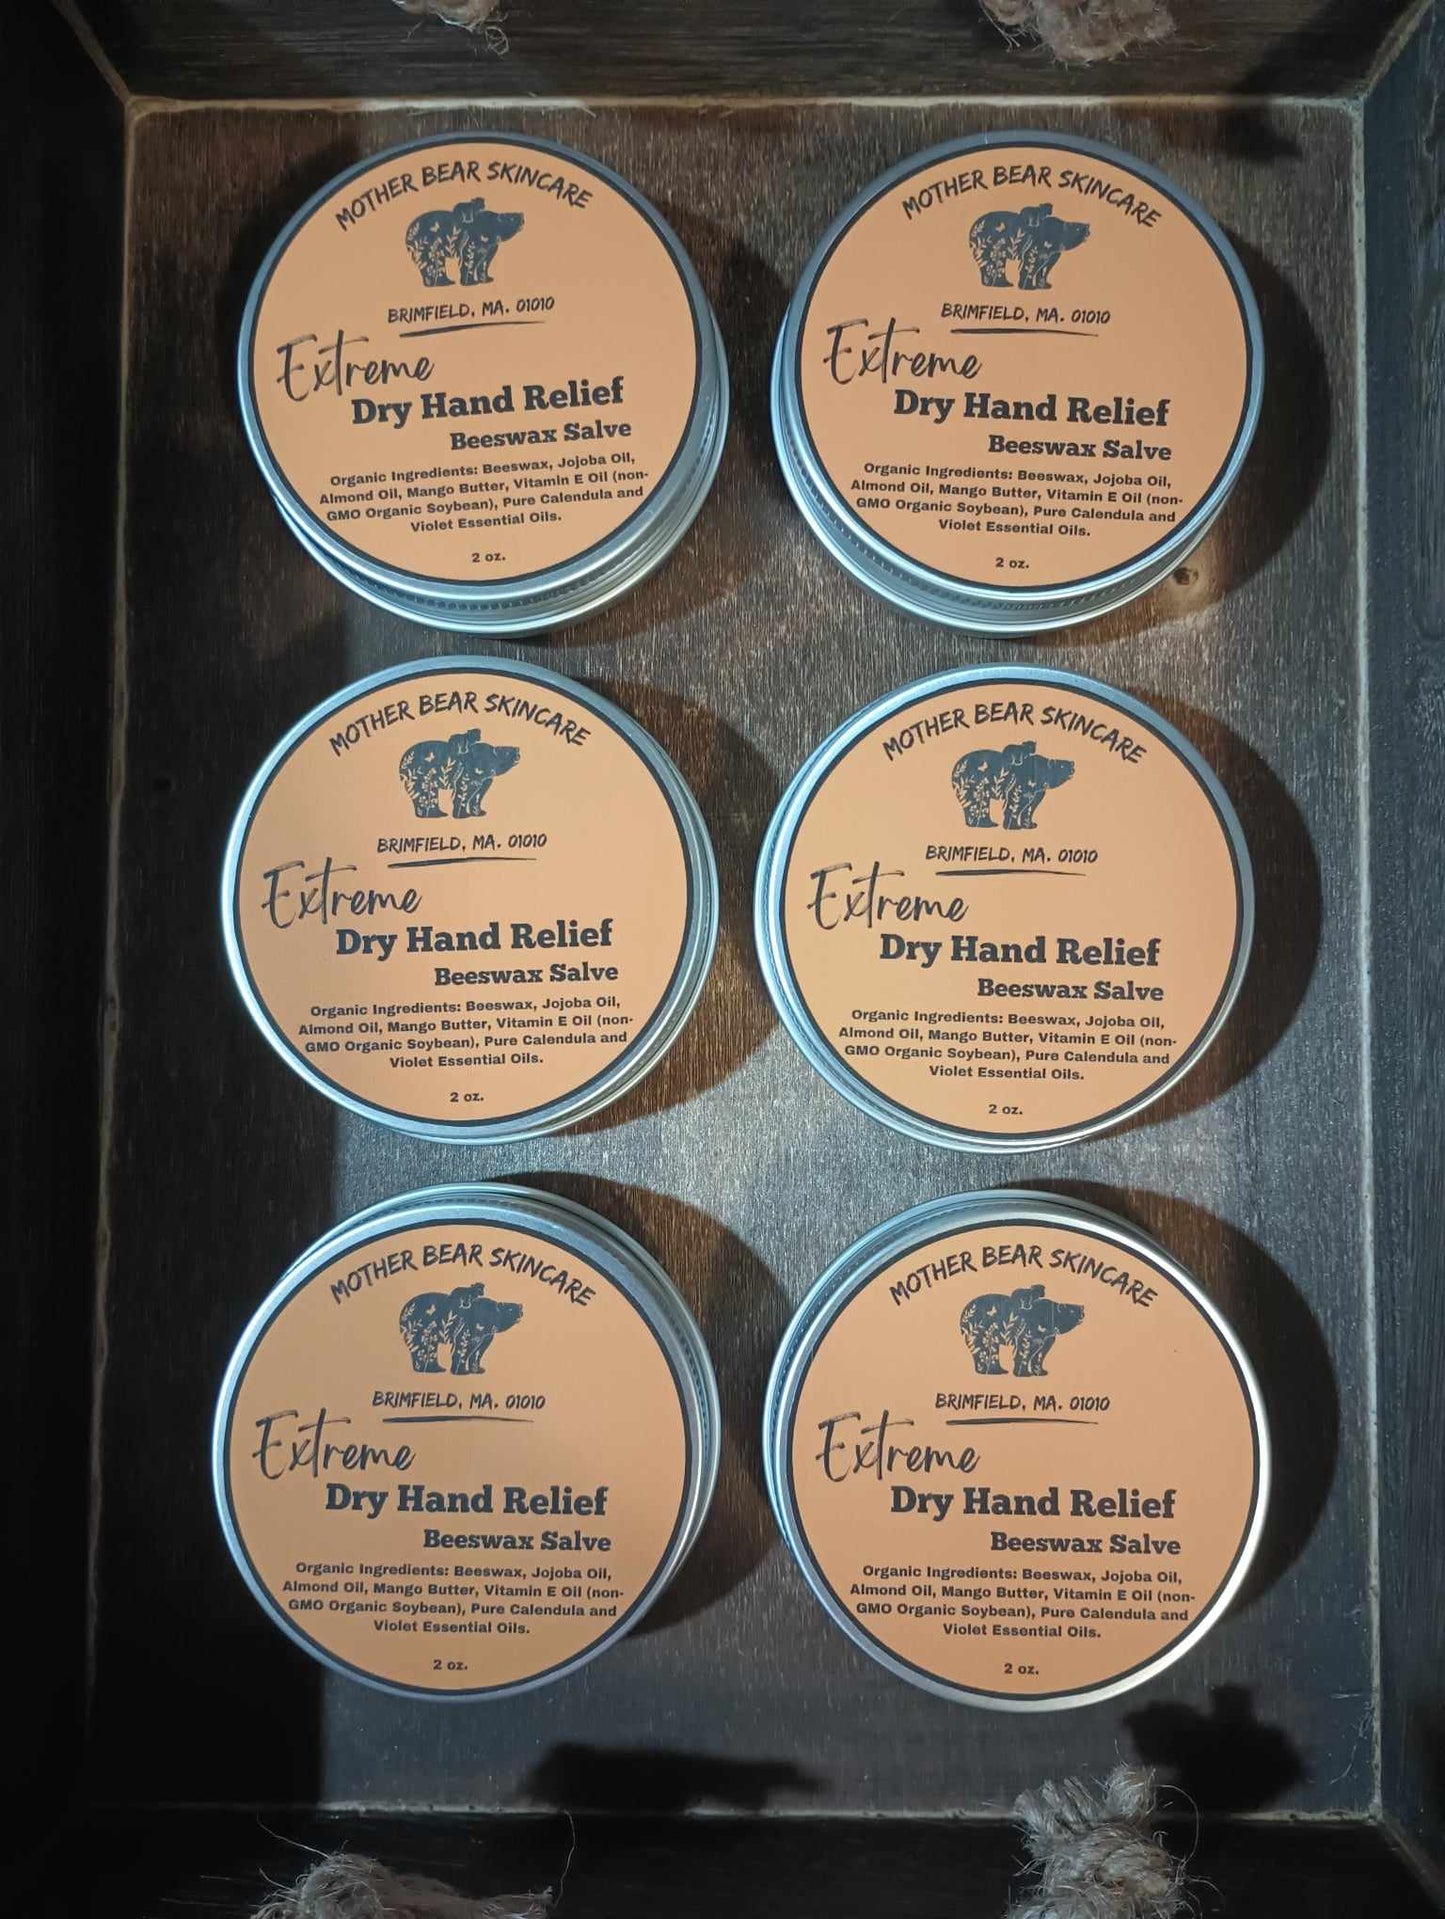 Extreme Dry Hand Relief Beeswax Salve